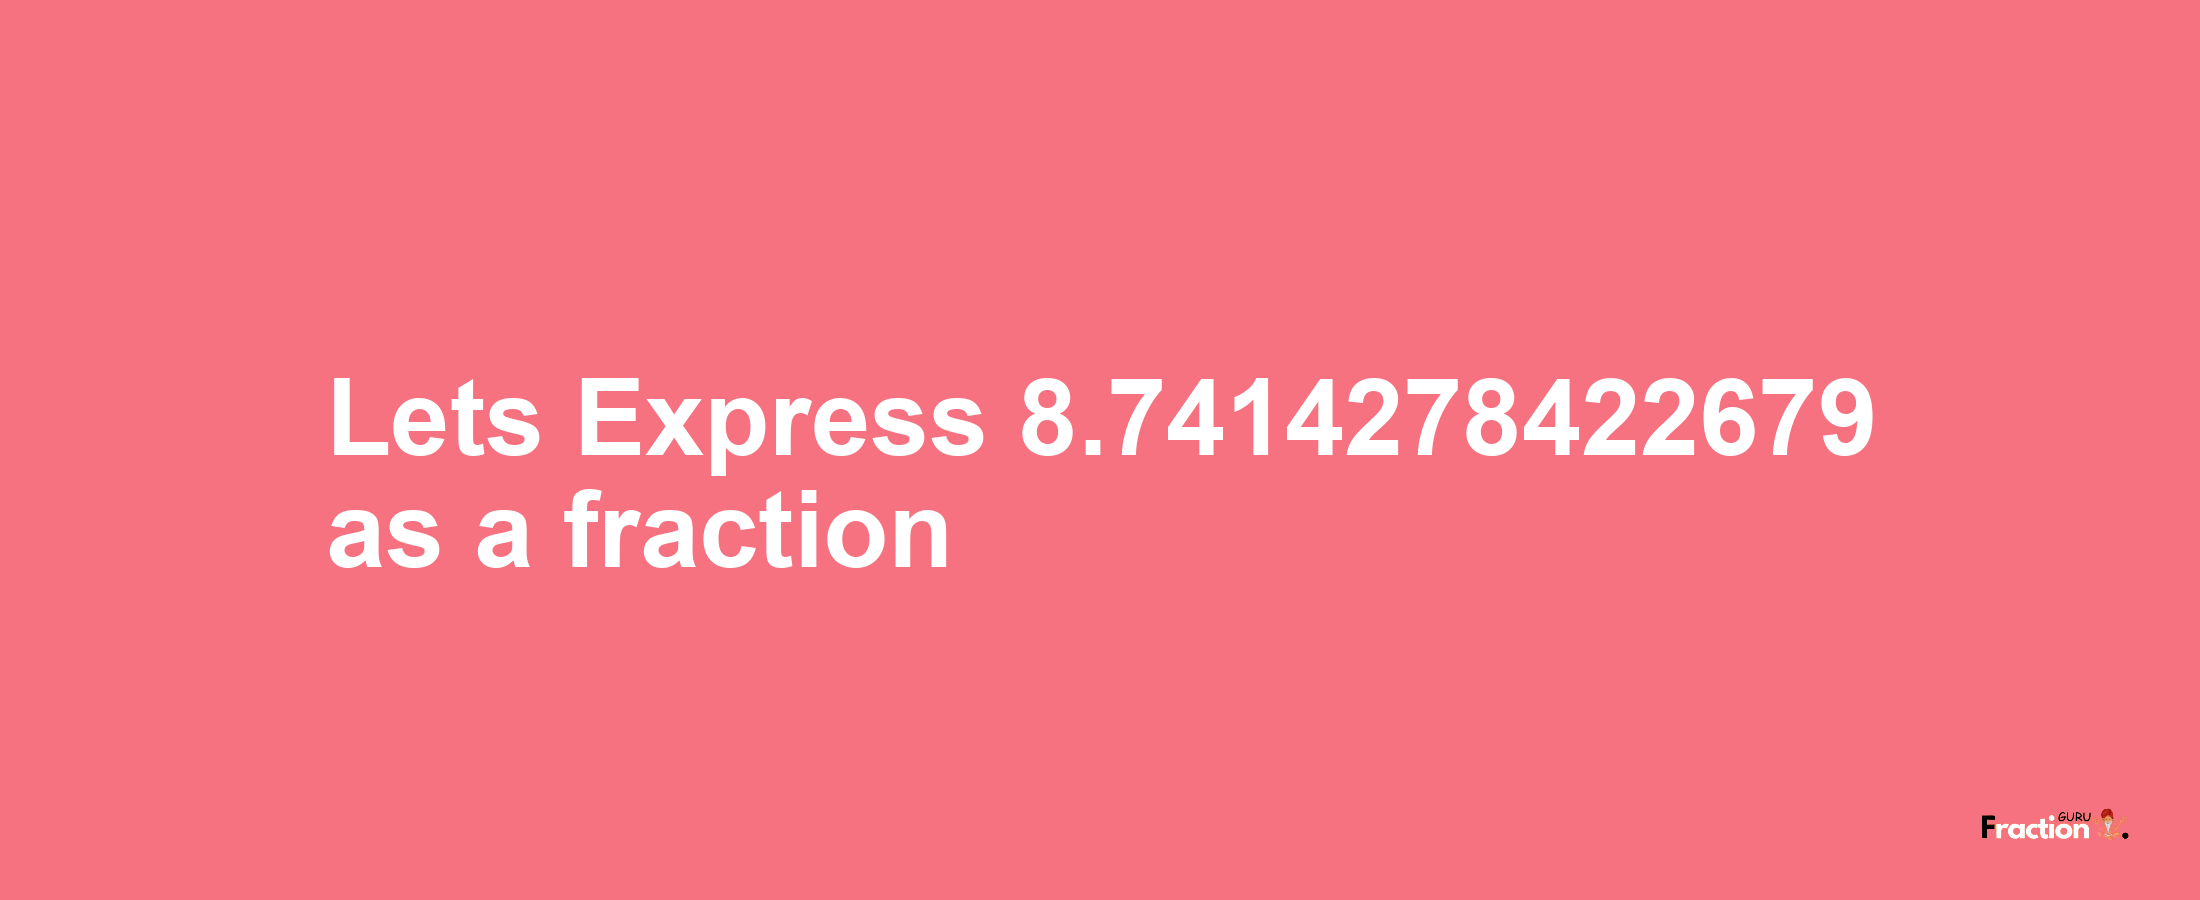 Lets Express 8.7414278422679 as afraction